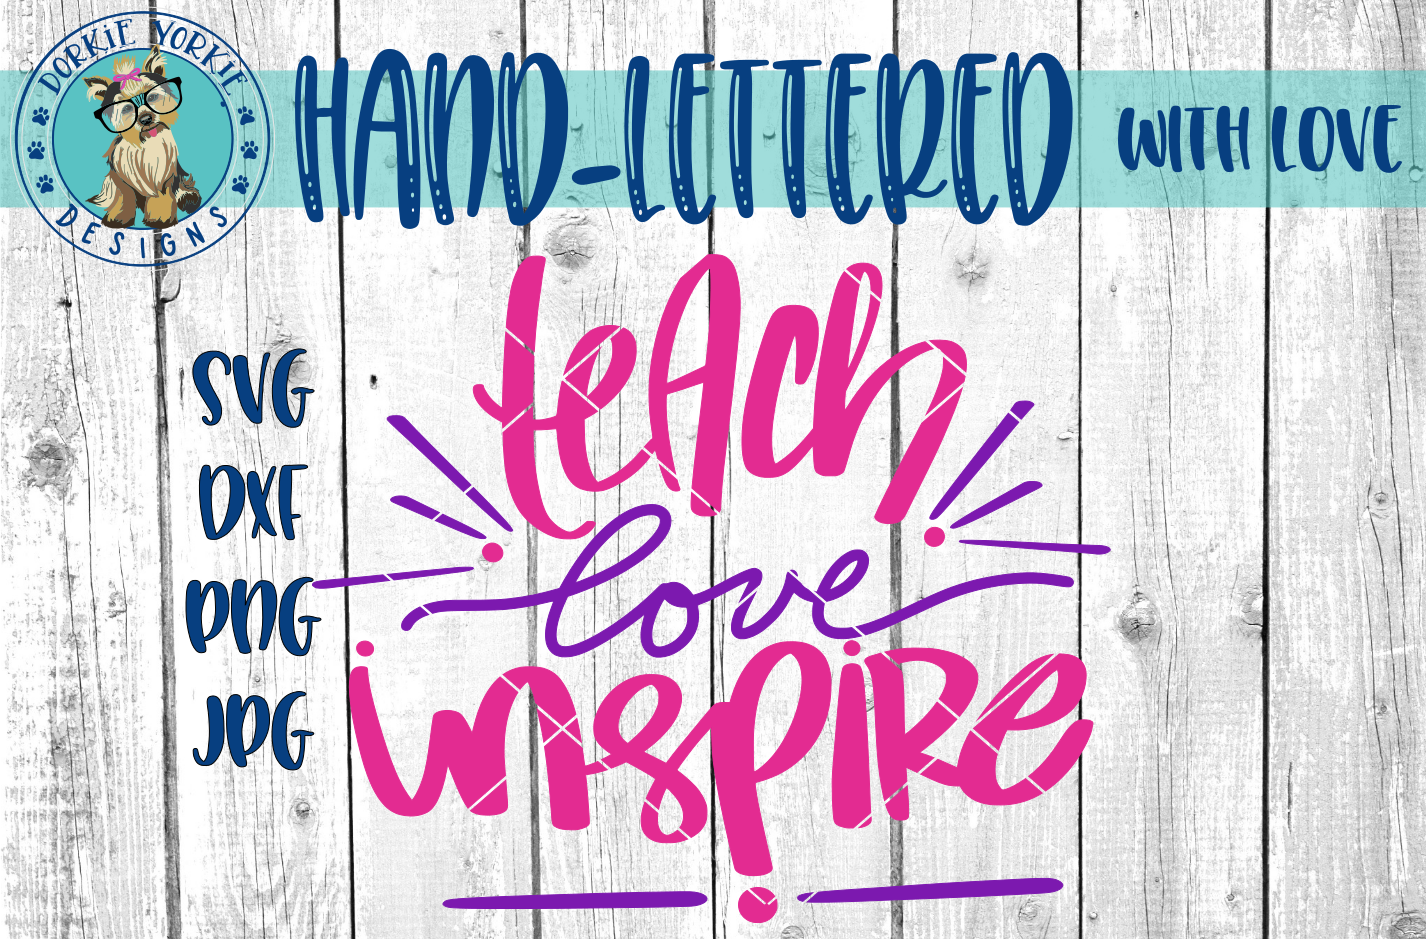 Free Free 240 Teach Love Inspire Svg SVG PNG EPS DXF File